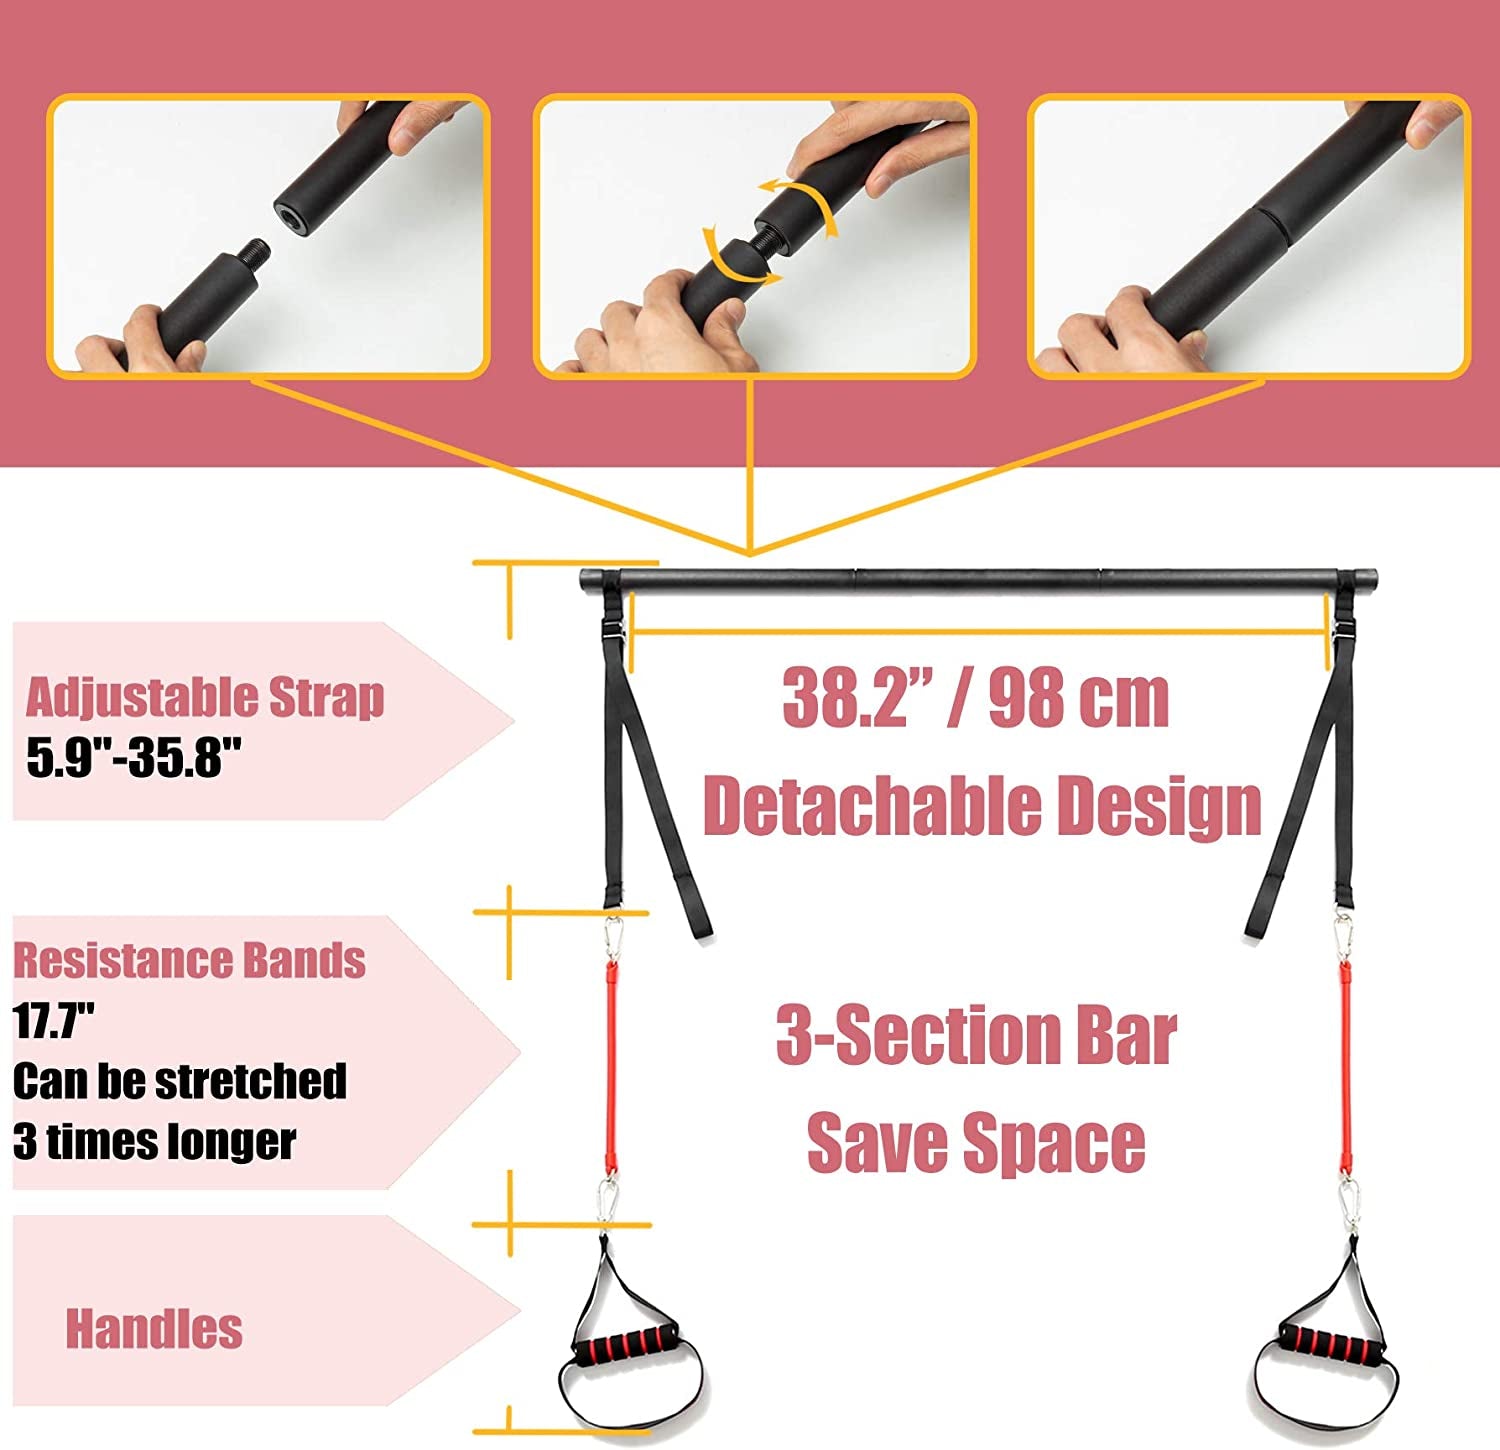 Portable Pilates Bar Kit with Resistance Bands, Portable Stick Bar Strength Training Set Home Gym Workout Equipment